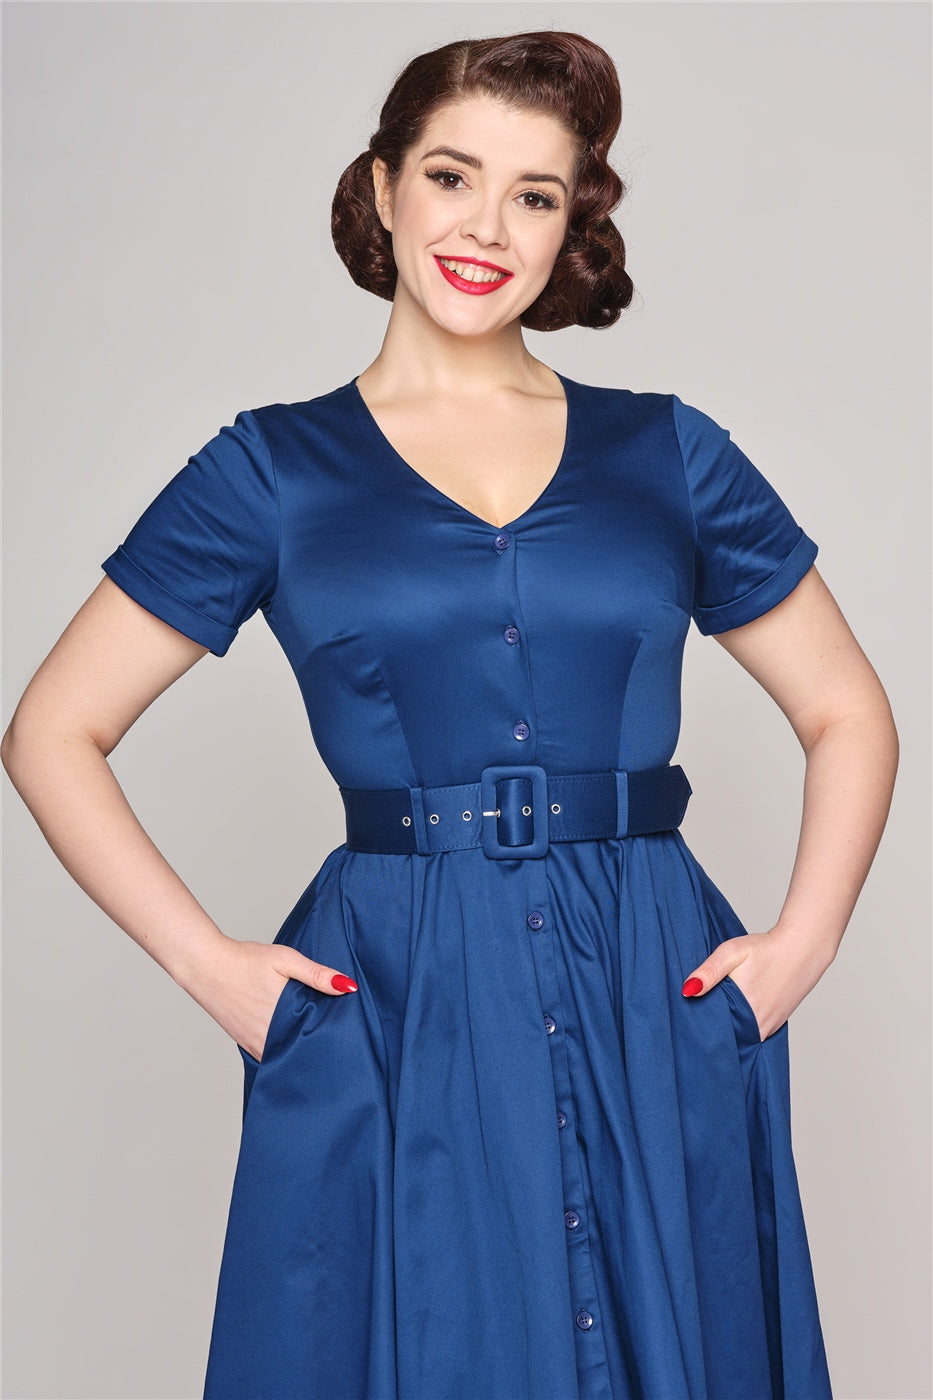 Elegant woman with neat, styled up-do wearing the Shana navy blue swing dress standing with her hands in her pockets